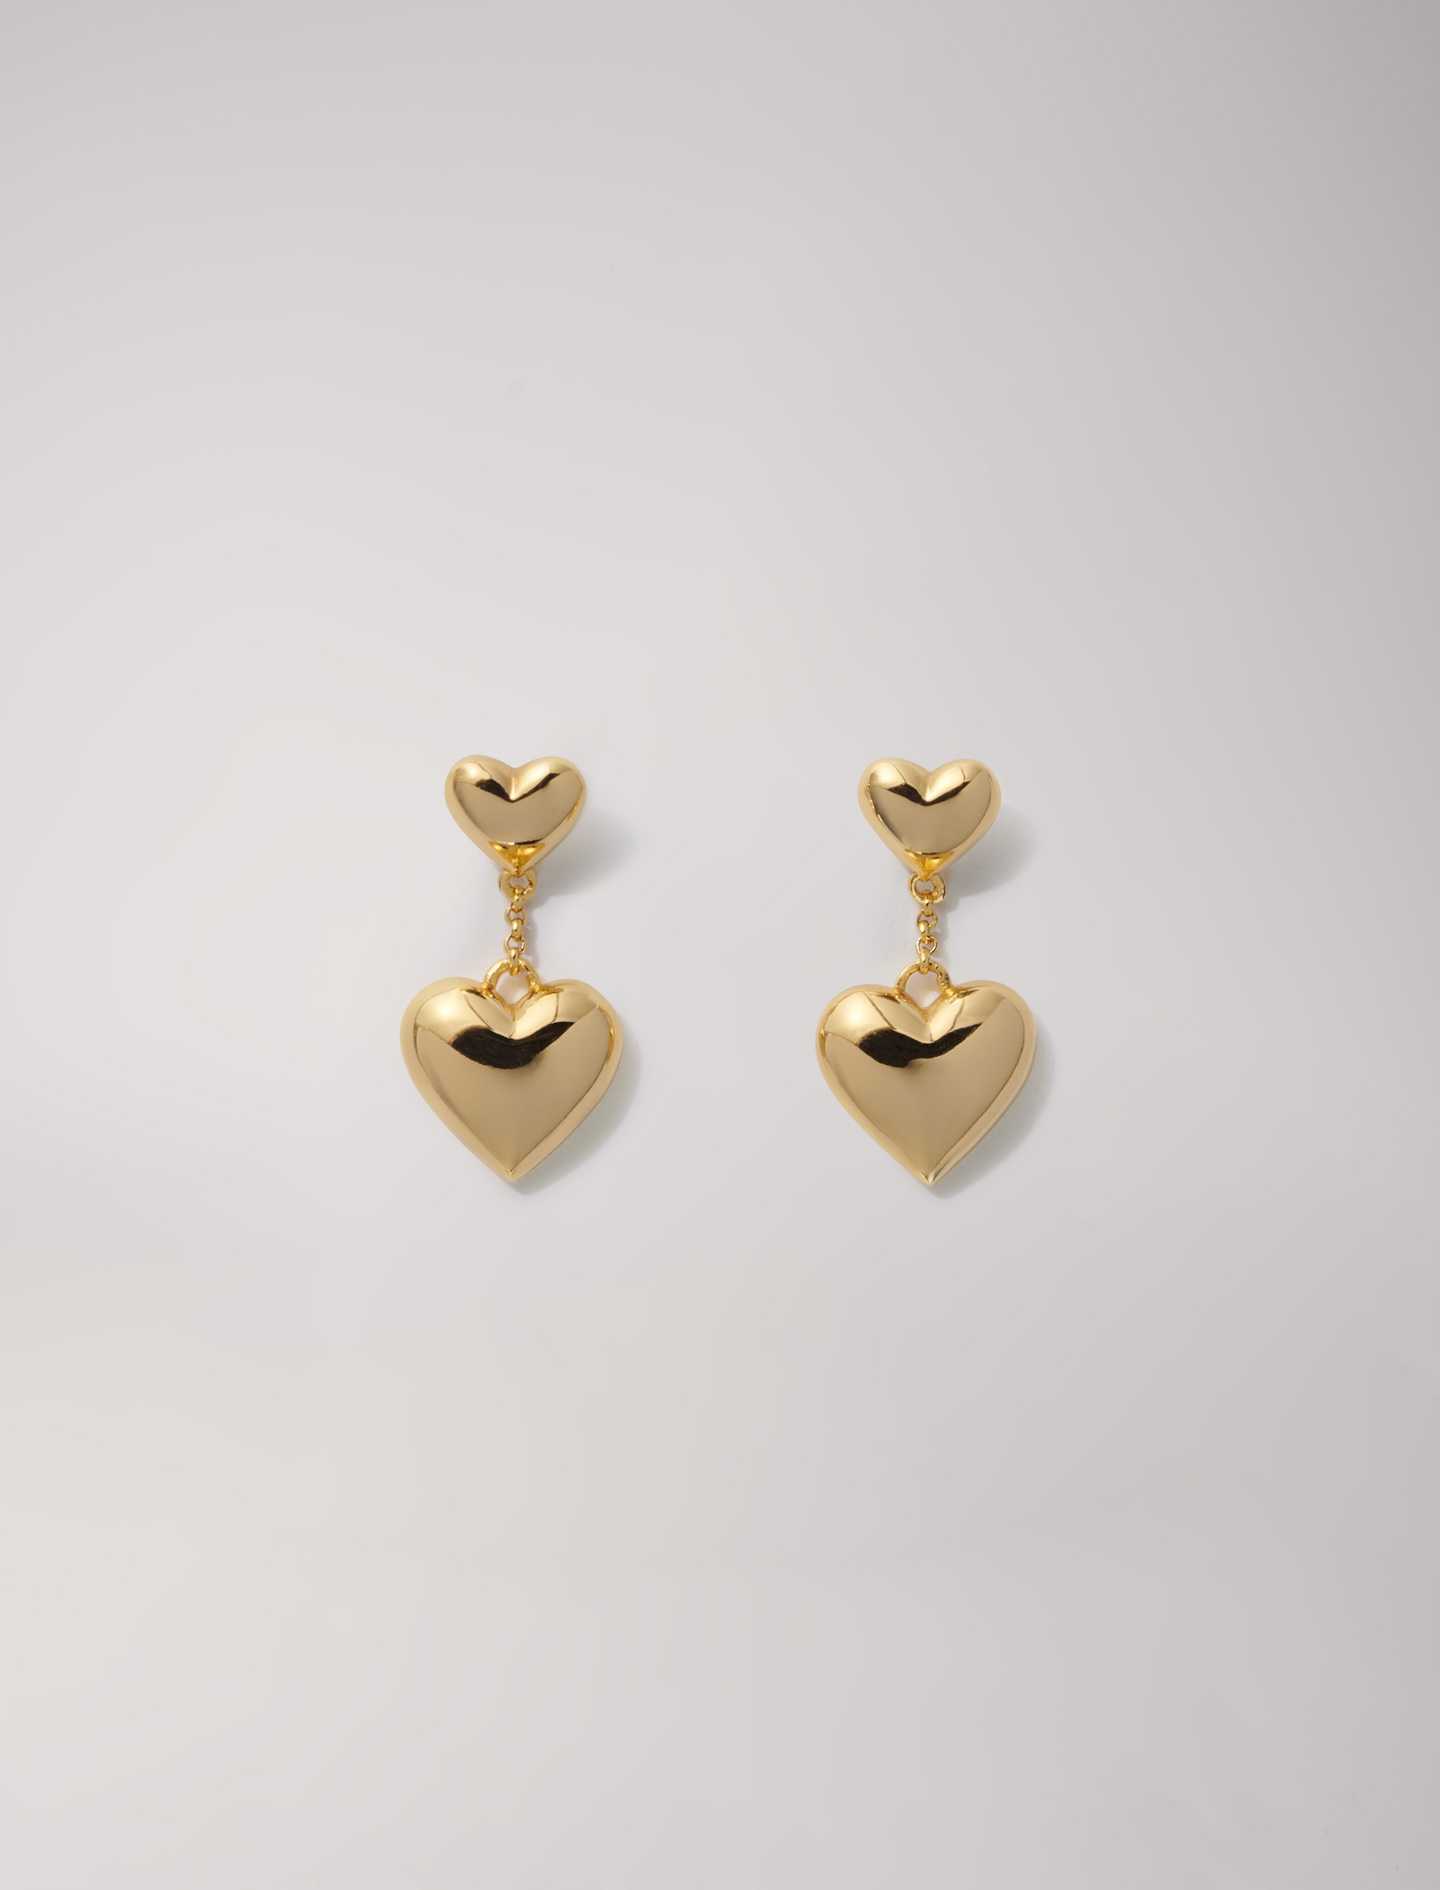 Mixte's brass Heart earrings for Spring/Summer, size Mixte-Jewelry-OS (ONE SIZE), in color Gold / Yellow